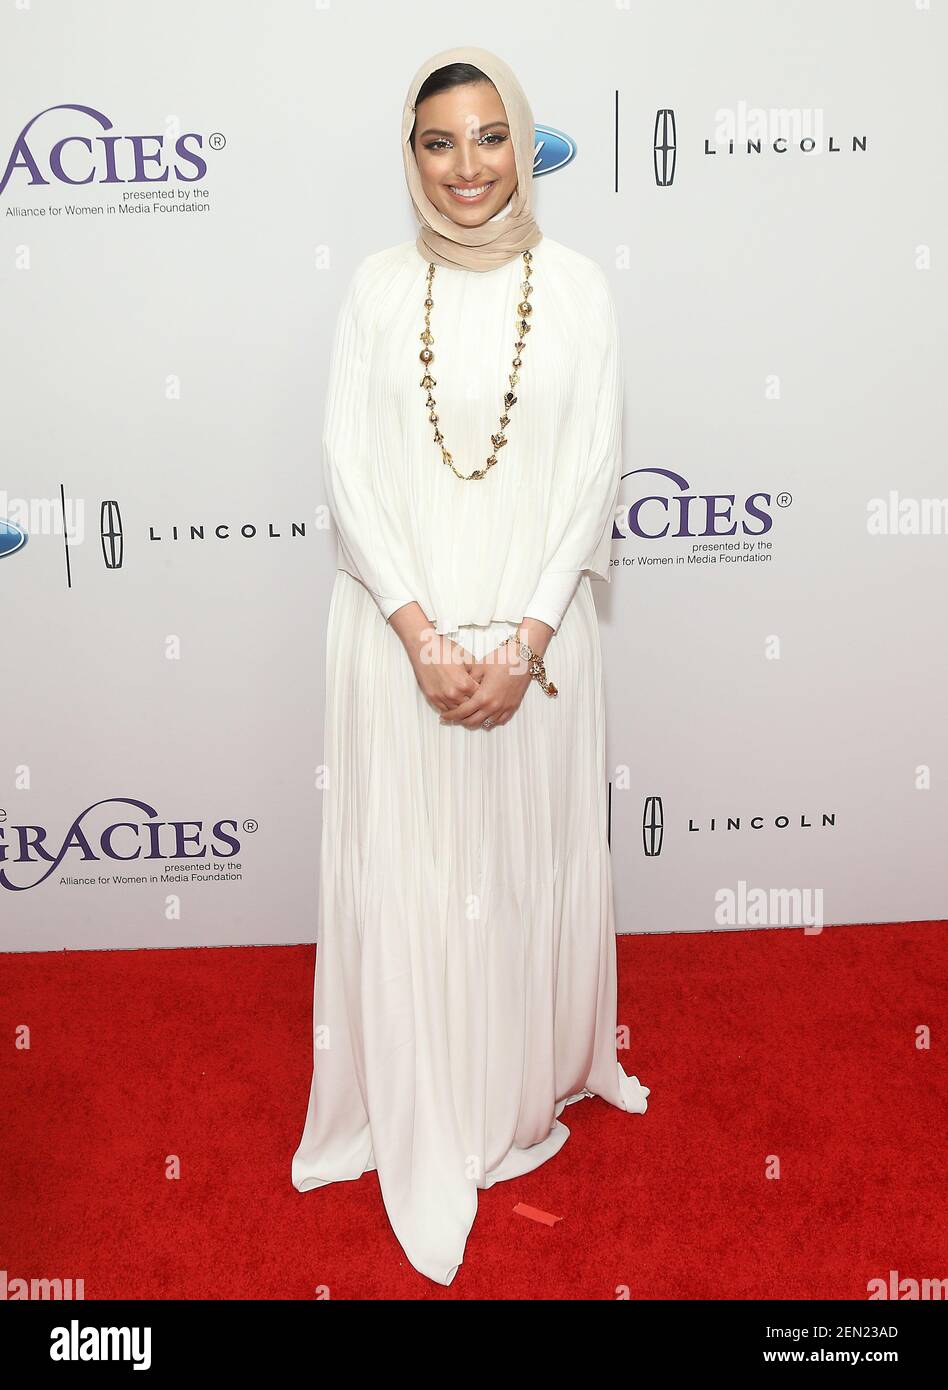 Noor Tagouri attends the 44th Annual Gracie Awards held at Four Seasons ...